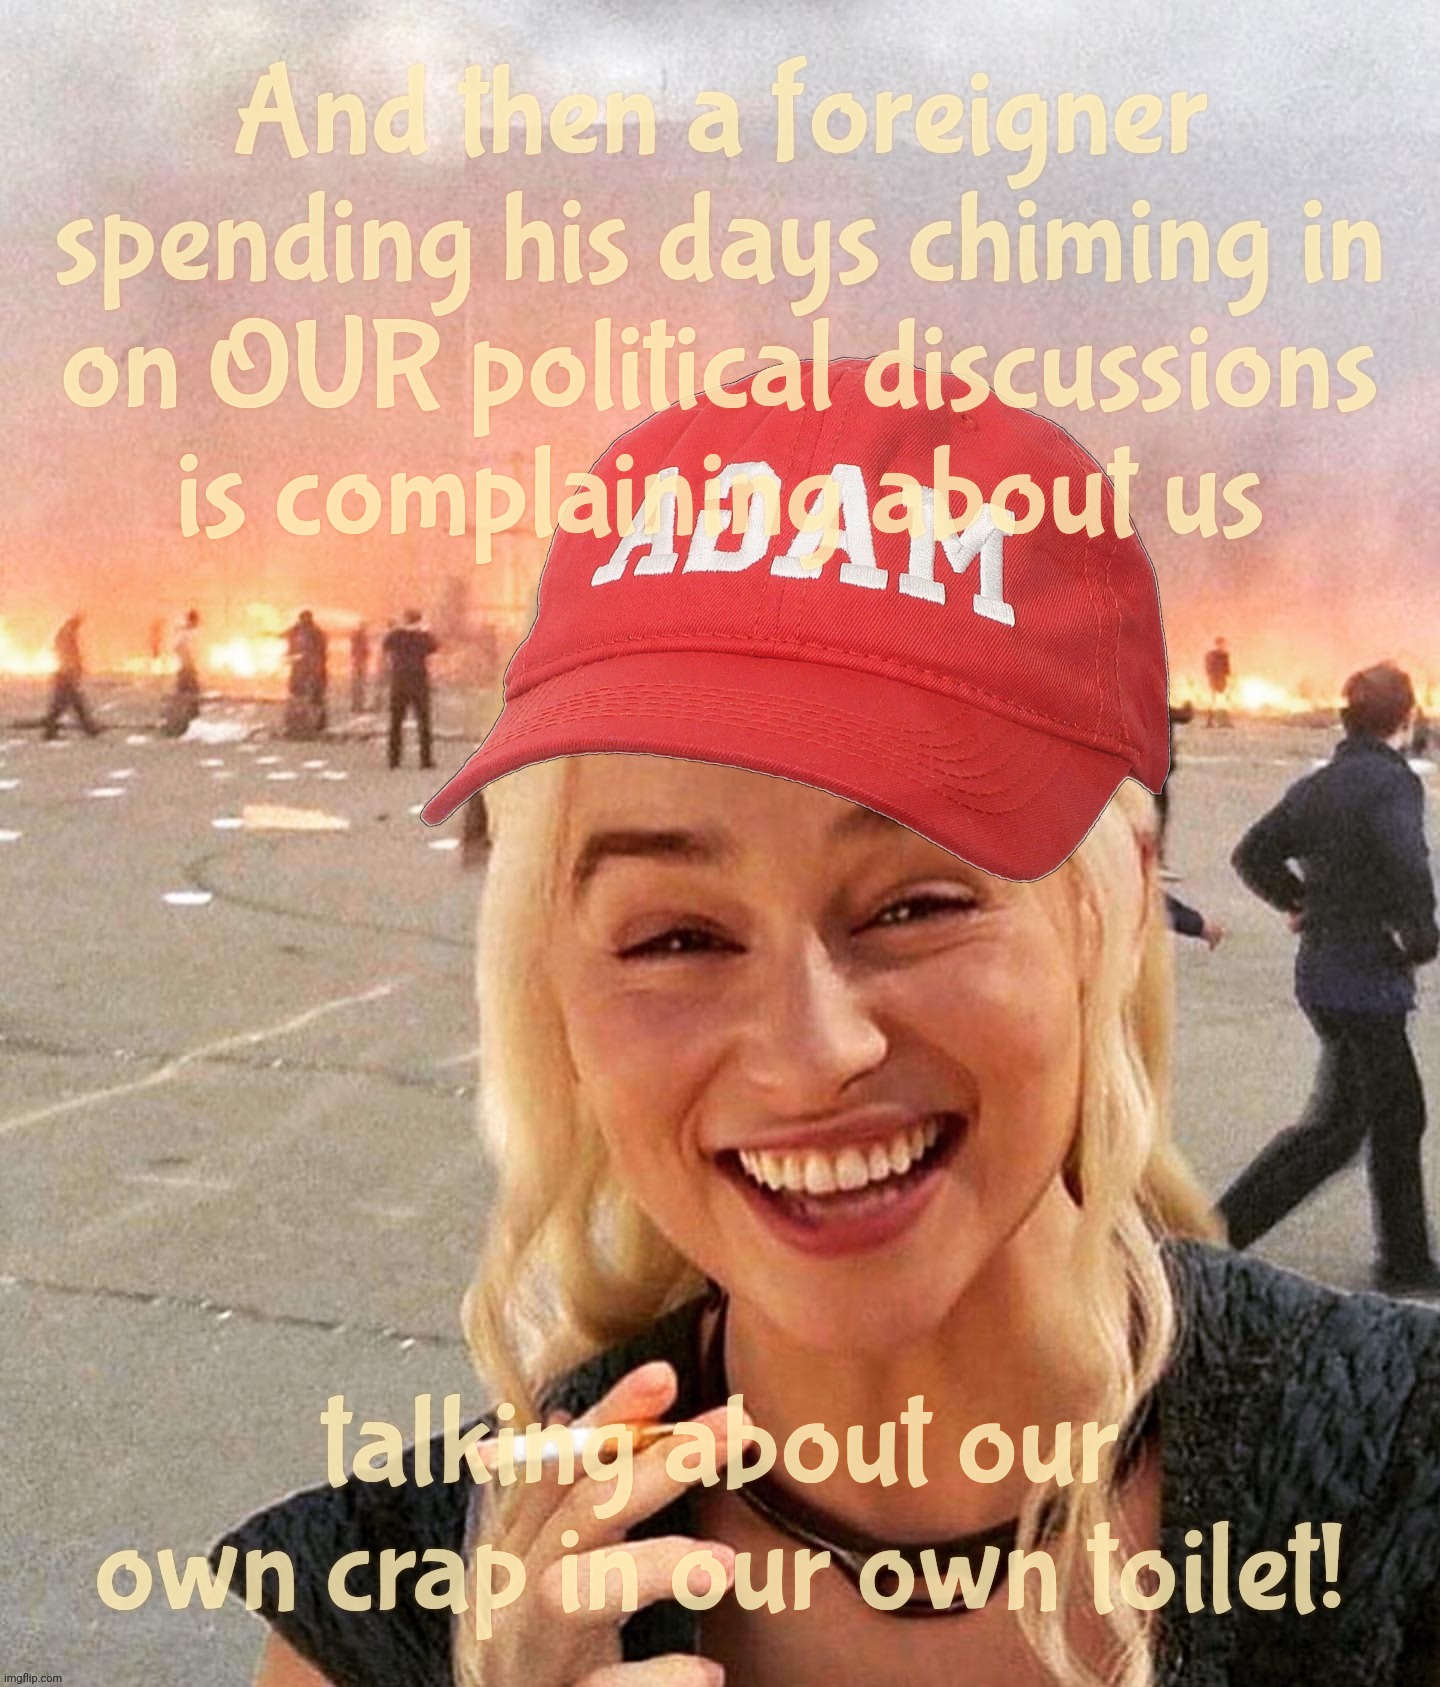 When 24/7 Trump-obsessed foreigners who've never been here complain about real Americans having TDS for not being beta cucks | And then a foreigner
spending his days chiming in
on OUR political discussions
is complaining about us; talking about our own crap in our own toilet! | image tagged in disaster smoker girl maga edition,magat wannabes,trump deluded sycophant,you're not one of us,get a hobby | made w/ Imgflip meme maker